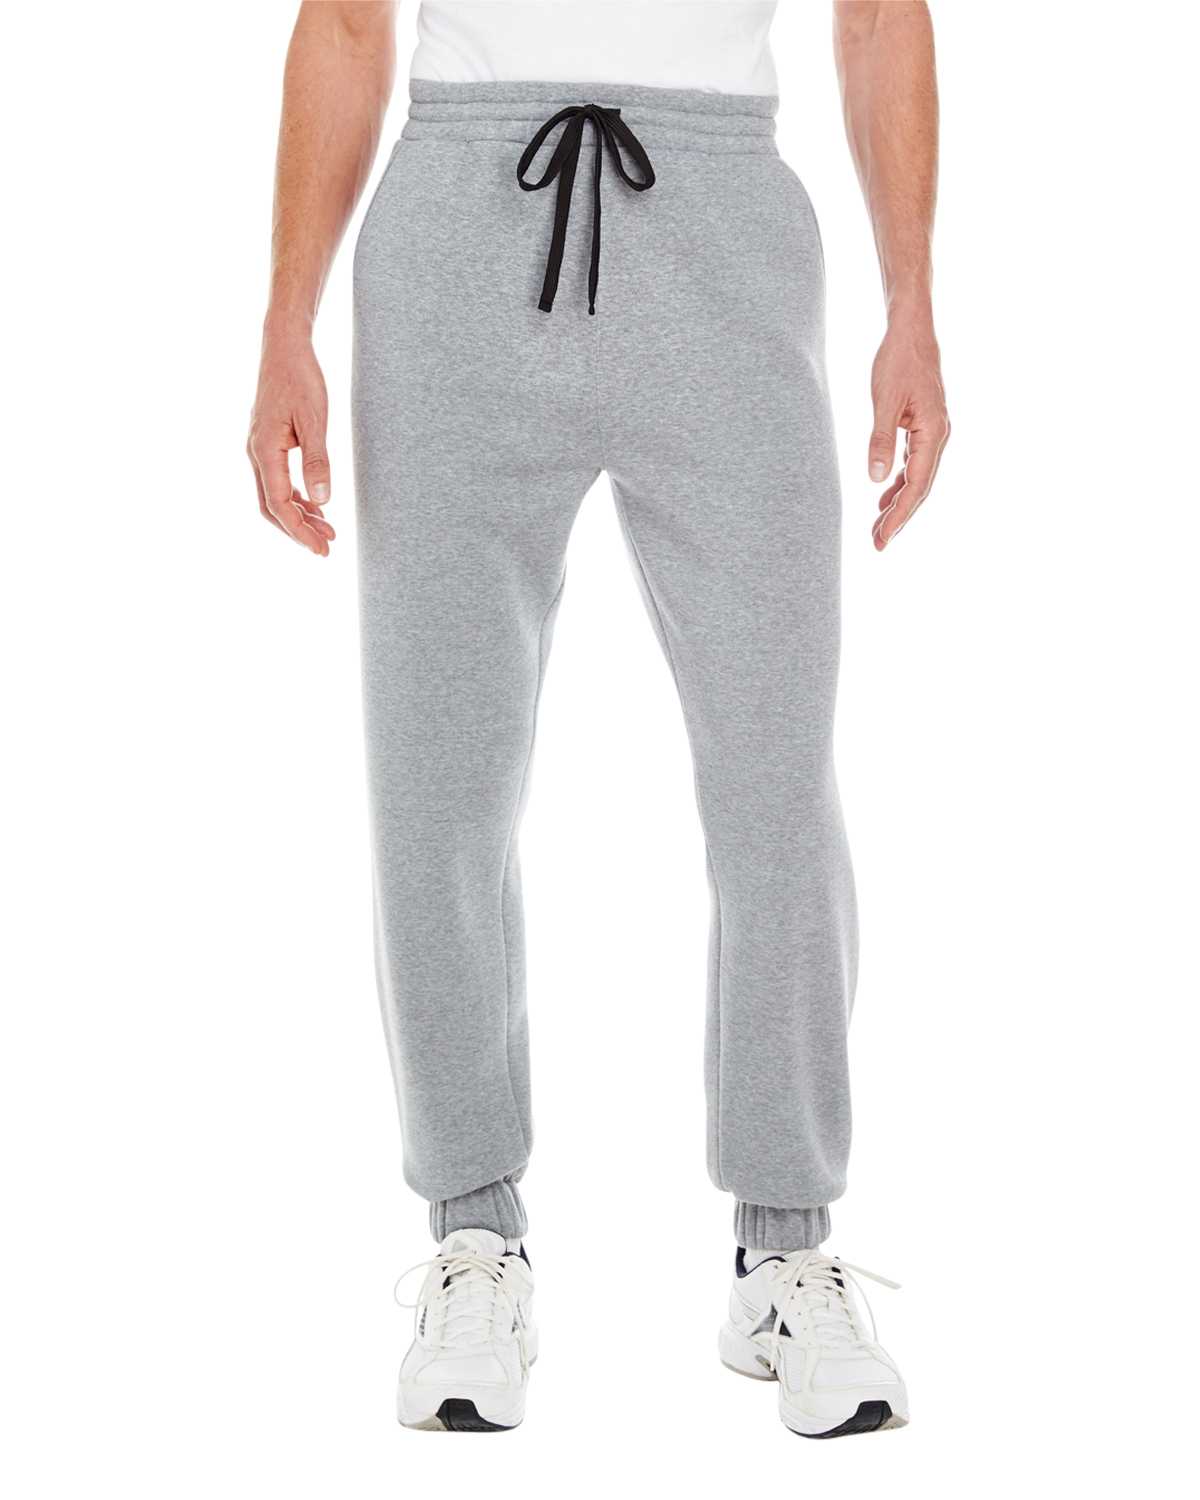 138+ Mens Heather Cuffed Sweatpants Back Right Half-Side View for Branding